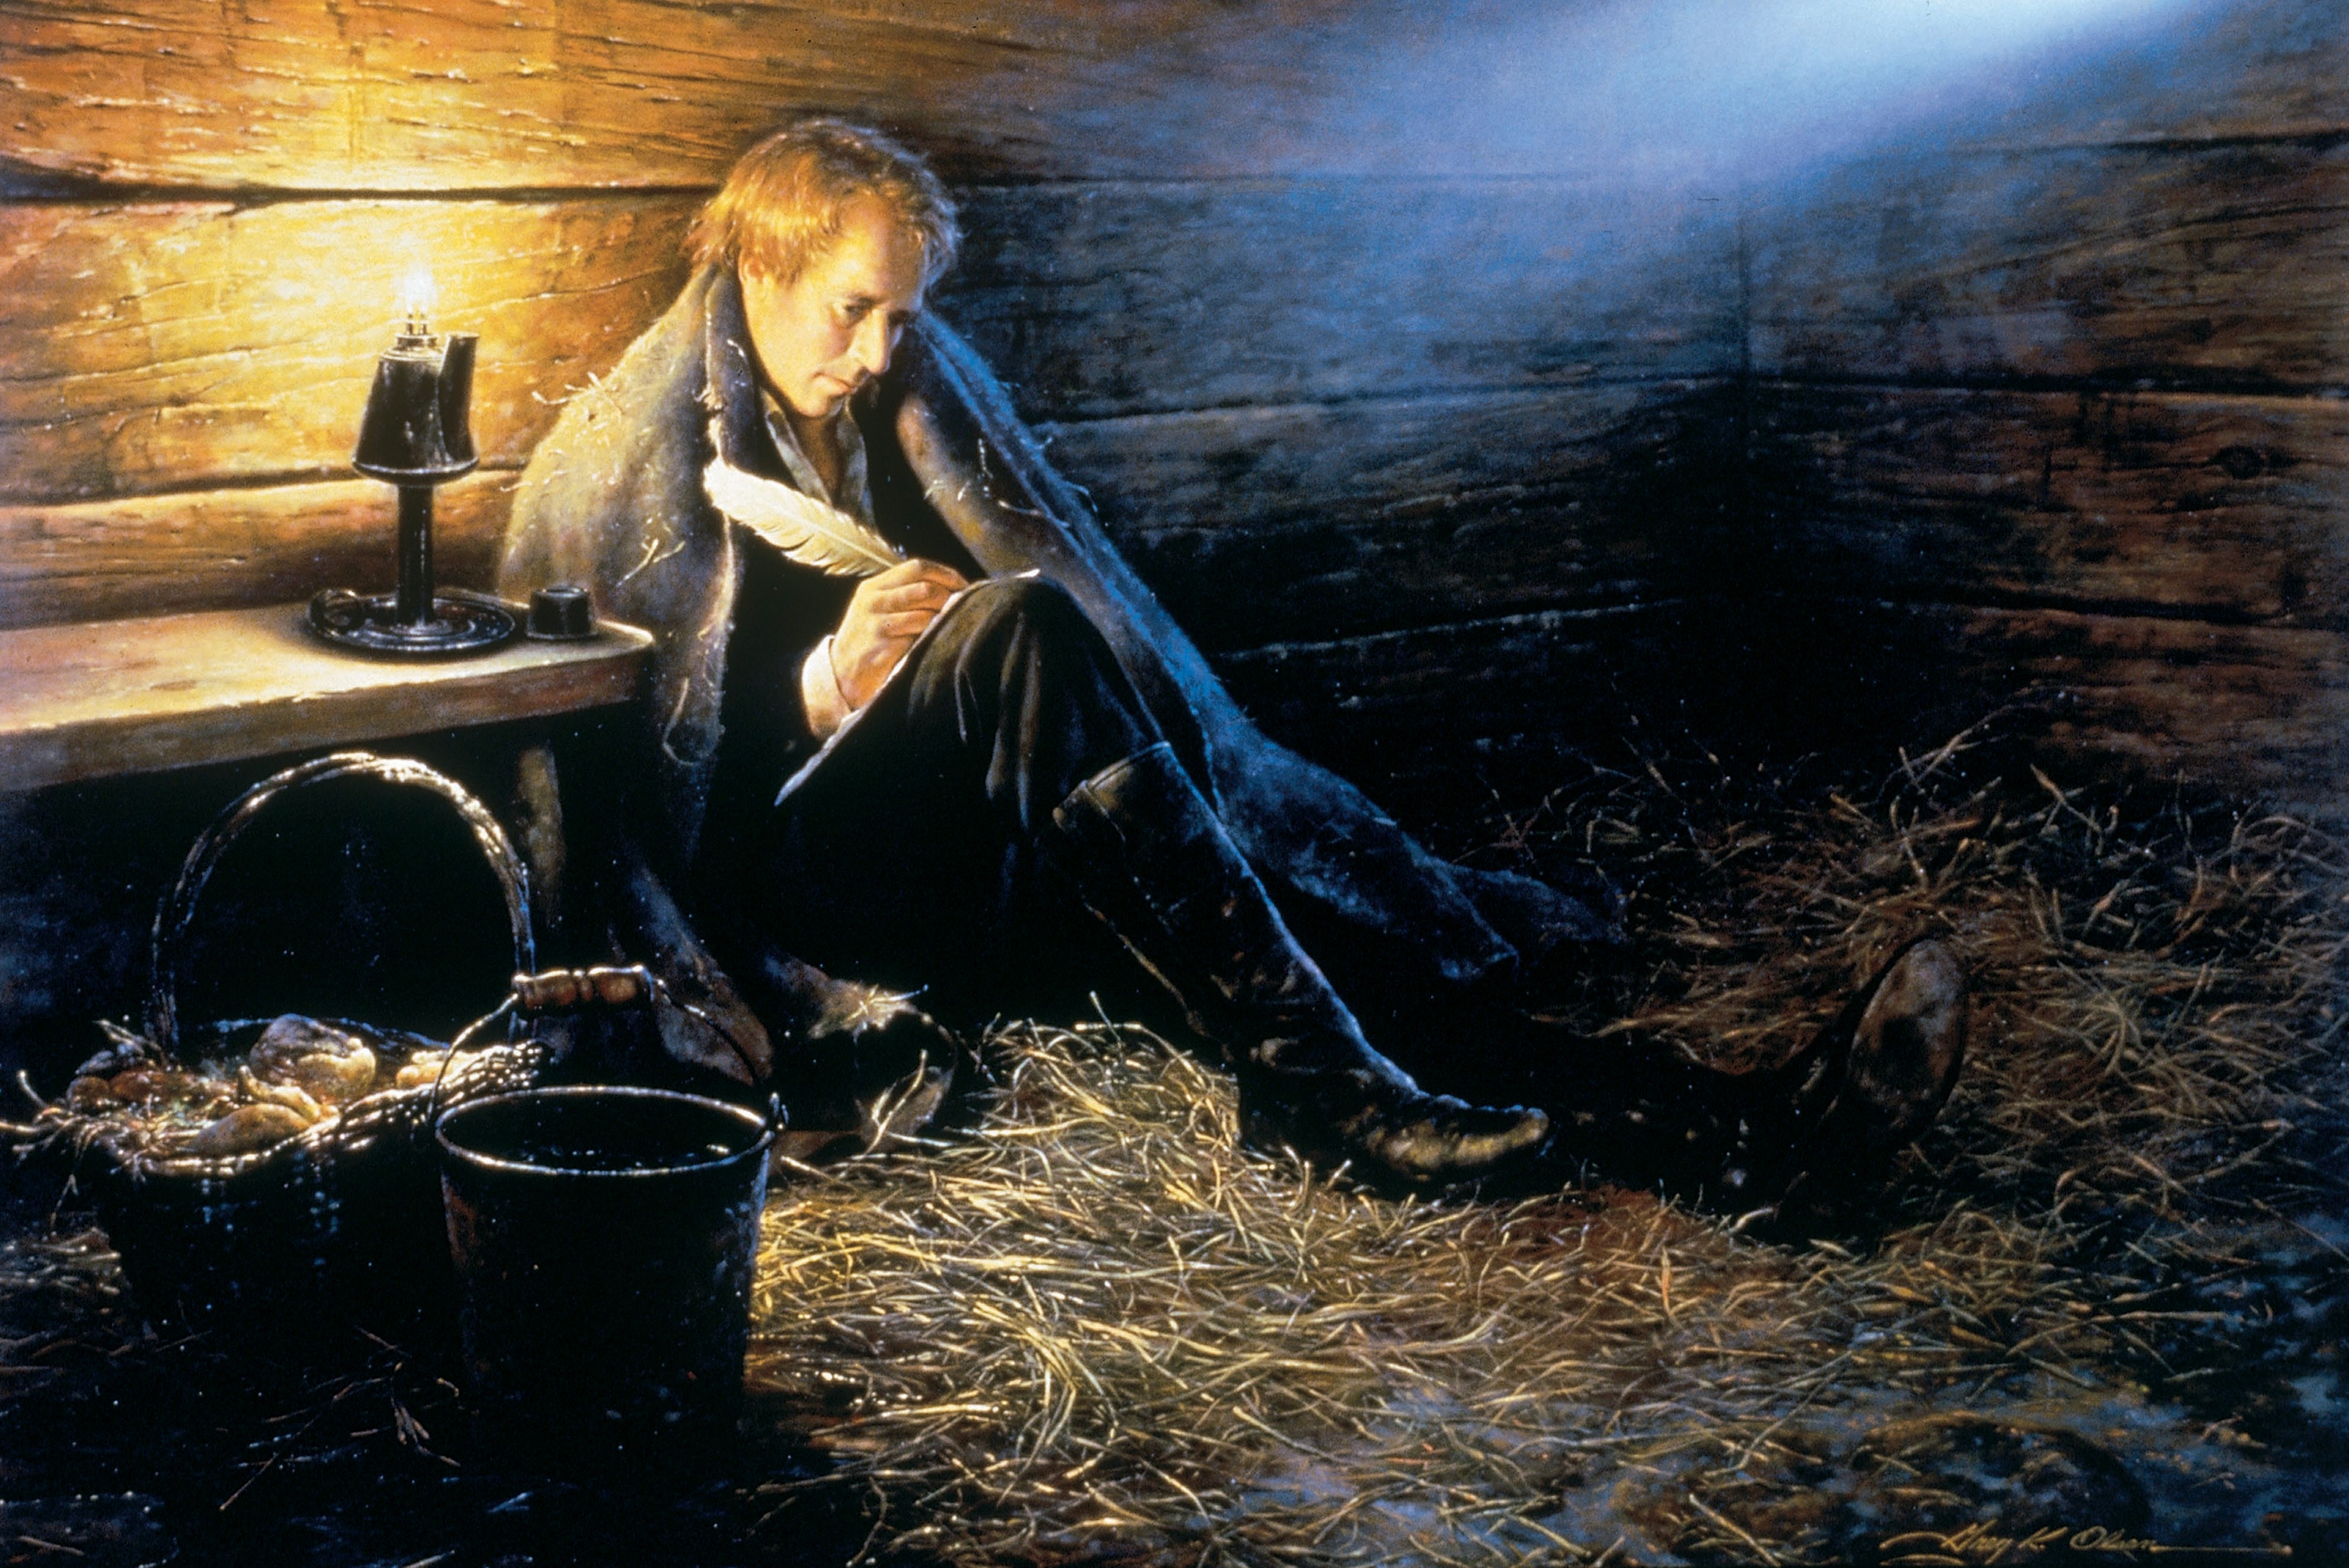 A painting by Greg K. Olsen depicting Joseph Smith sitting on the floor on some straw in Liberty Jail, writing on a piece of paper, with sunlight shining on him.